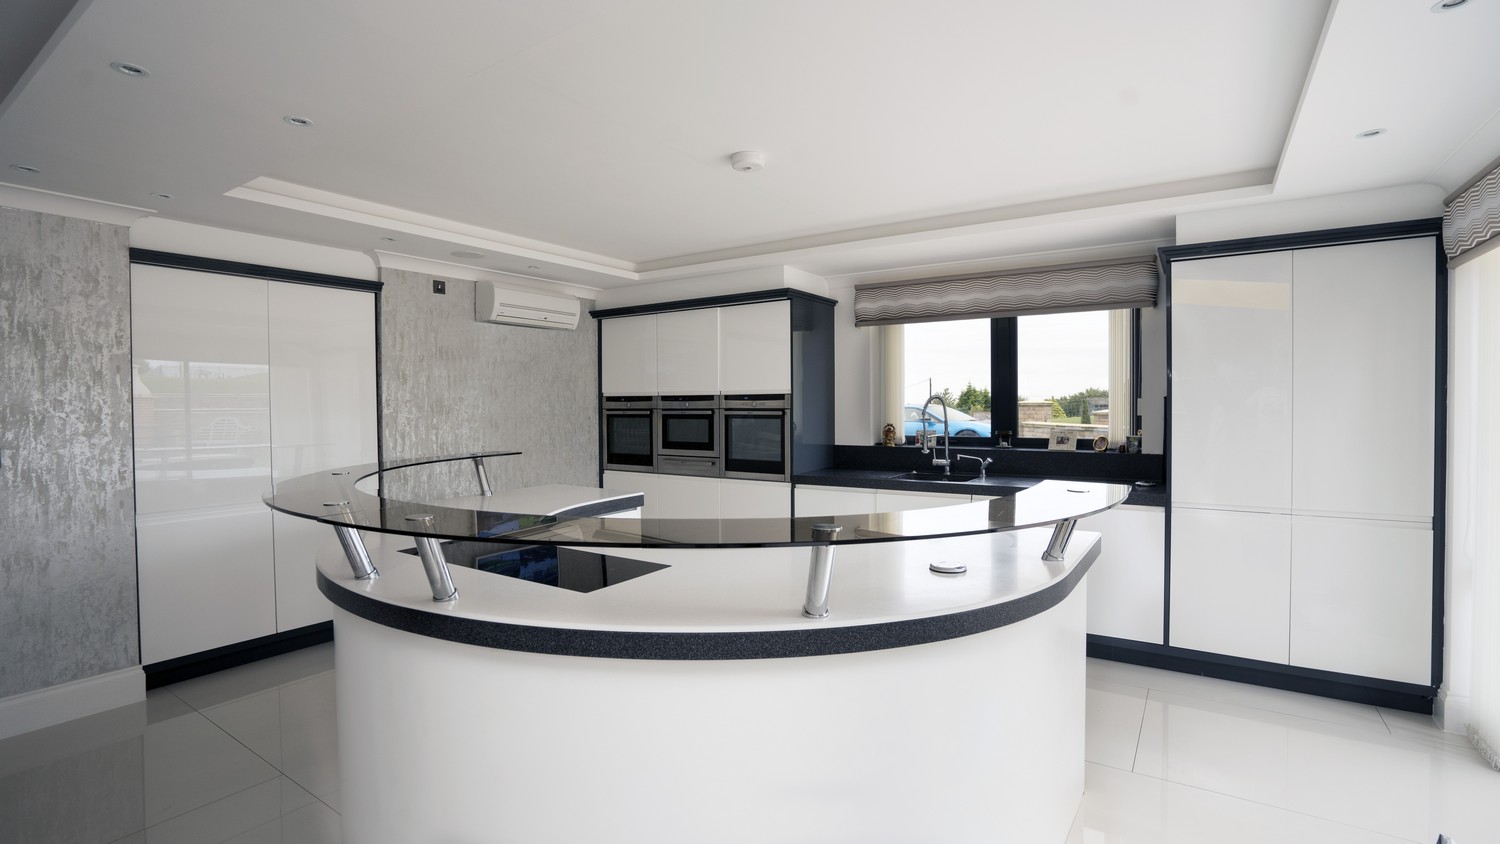 Gloss White Handle-less kitchen supplied and fitted in Aughton, Liverpool. This kitchen featuring a circular island at the center fo the kitchen a great space for both entertaining and dining.